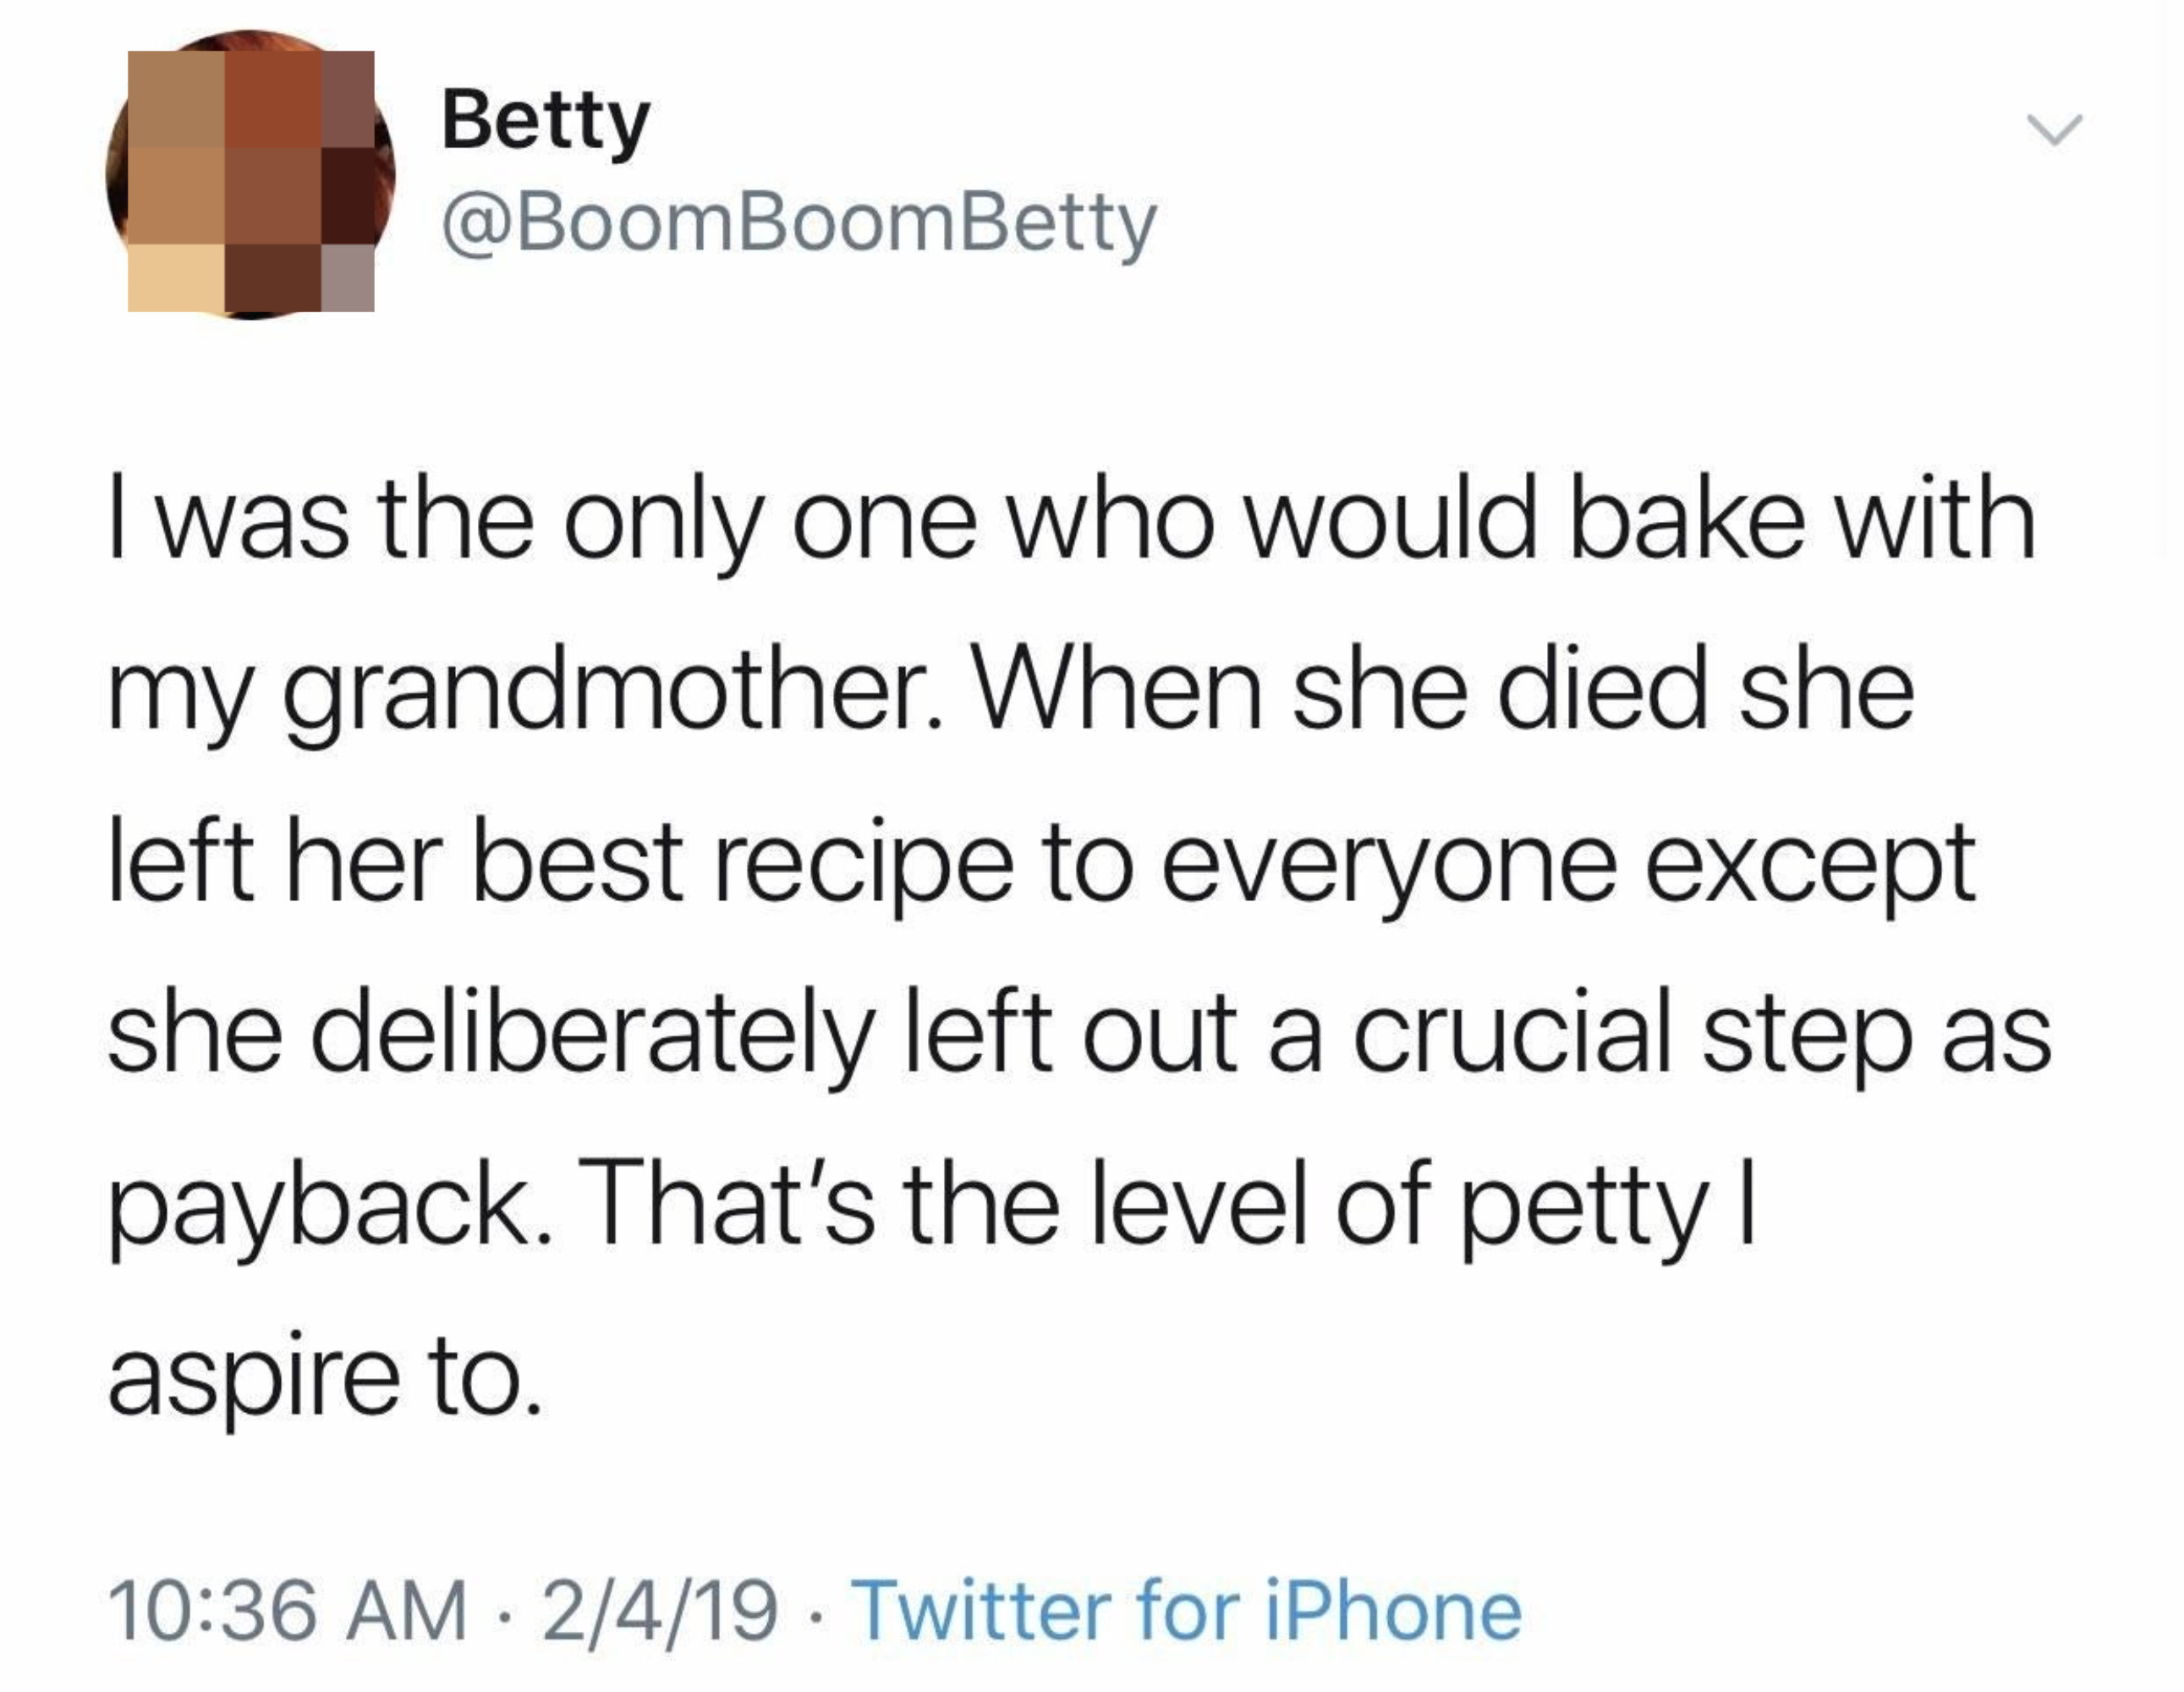 A tweet about a grandma leaving out pages of a recipe book on purpose